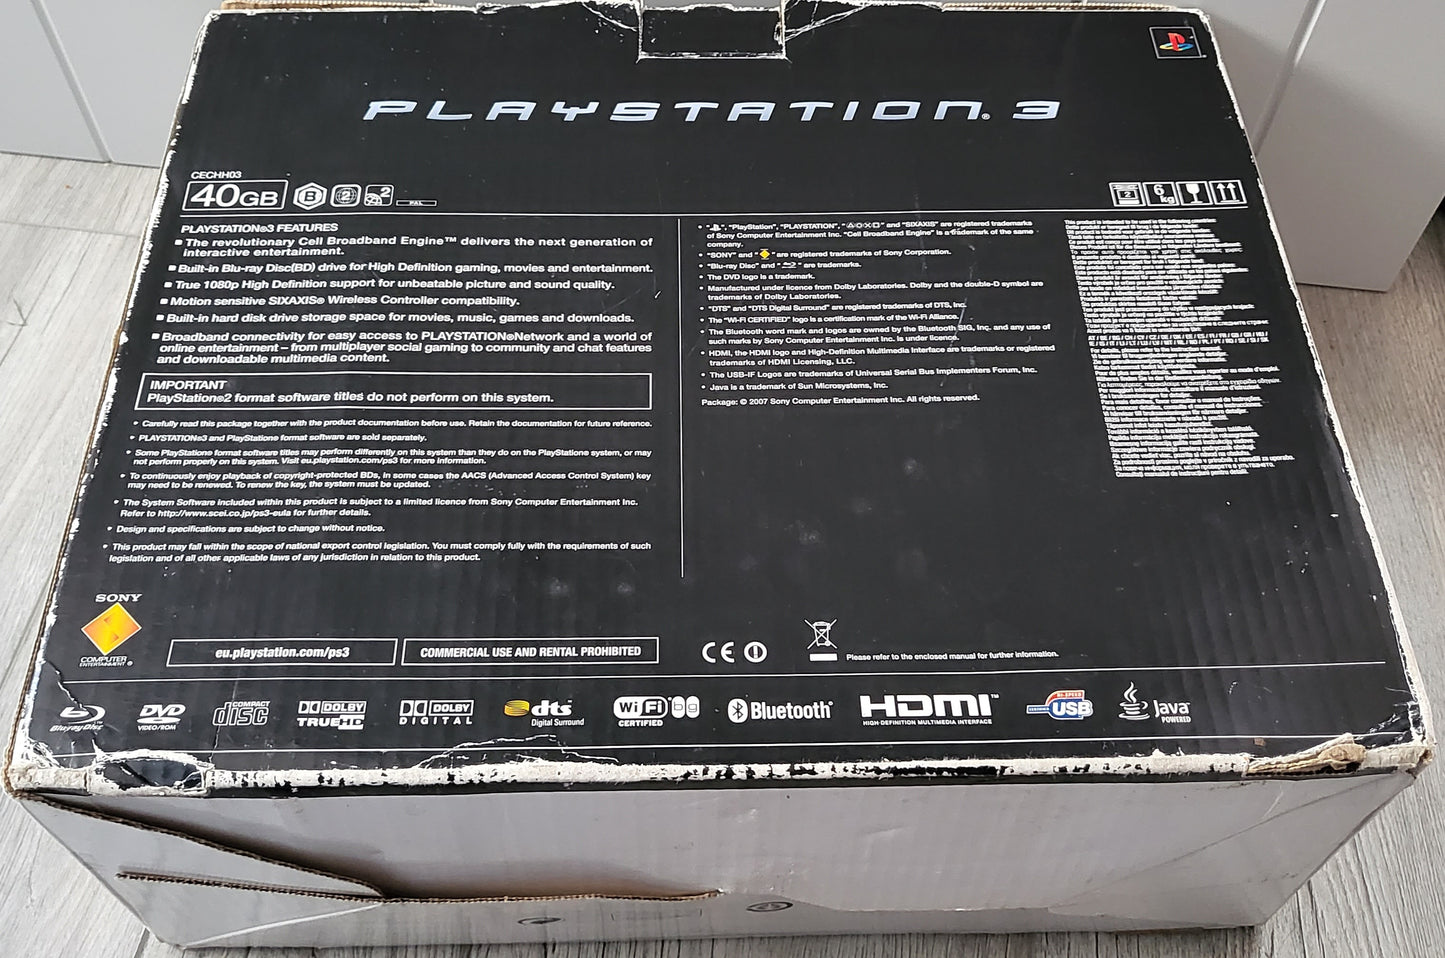 Boxed Sony Playstation 3 (PS3) Cechh03 40 GB Console